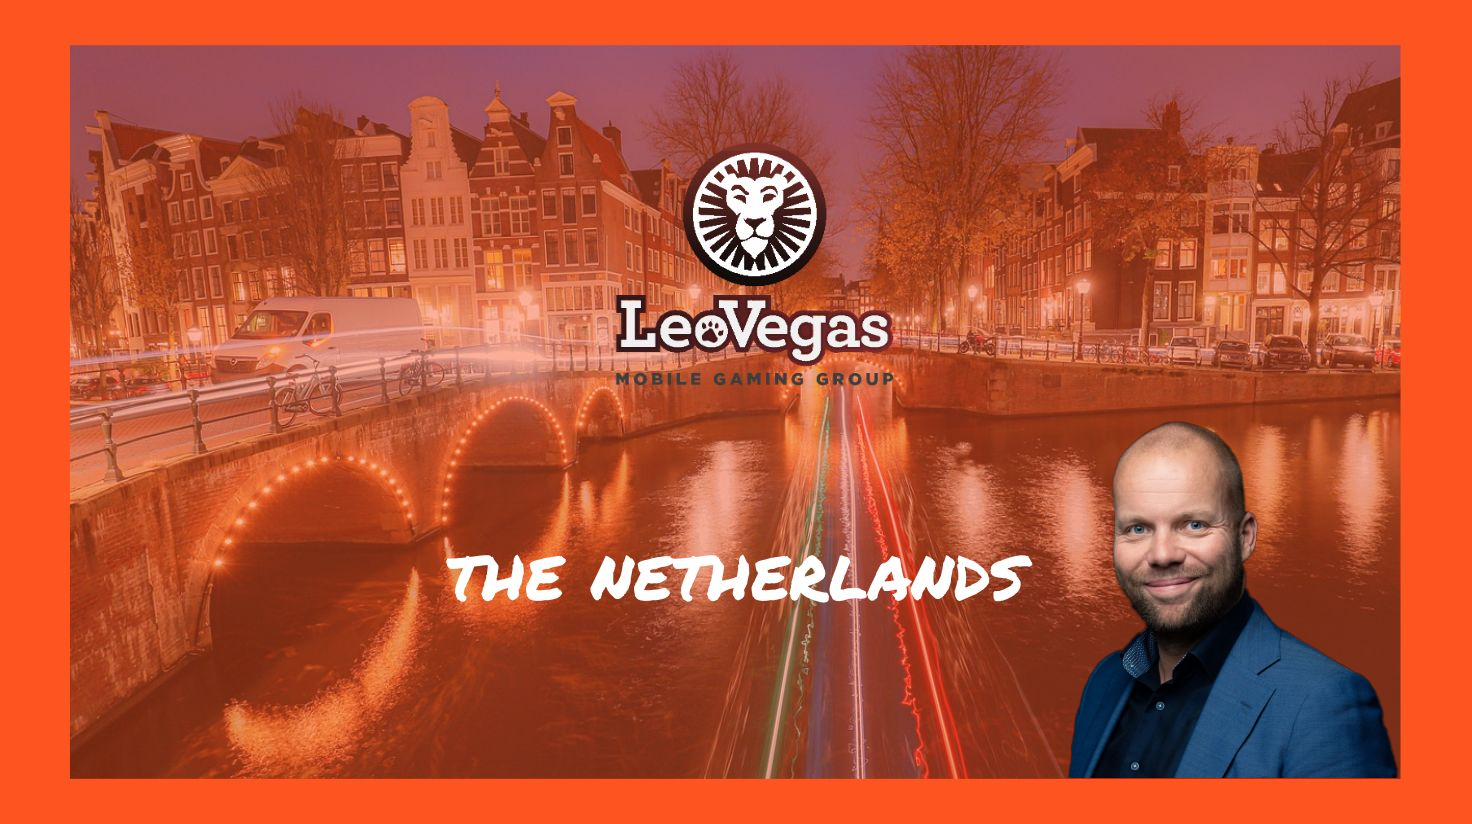 “LeoVegas.nl is off to a flying start!”